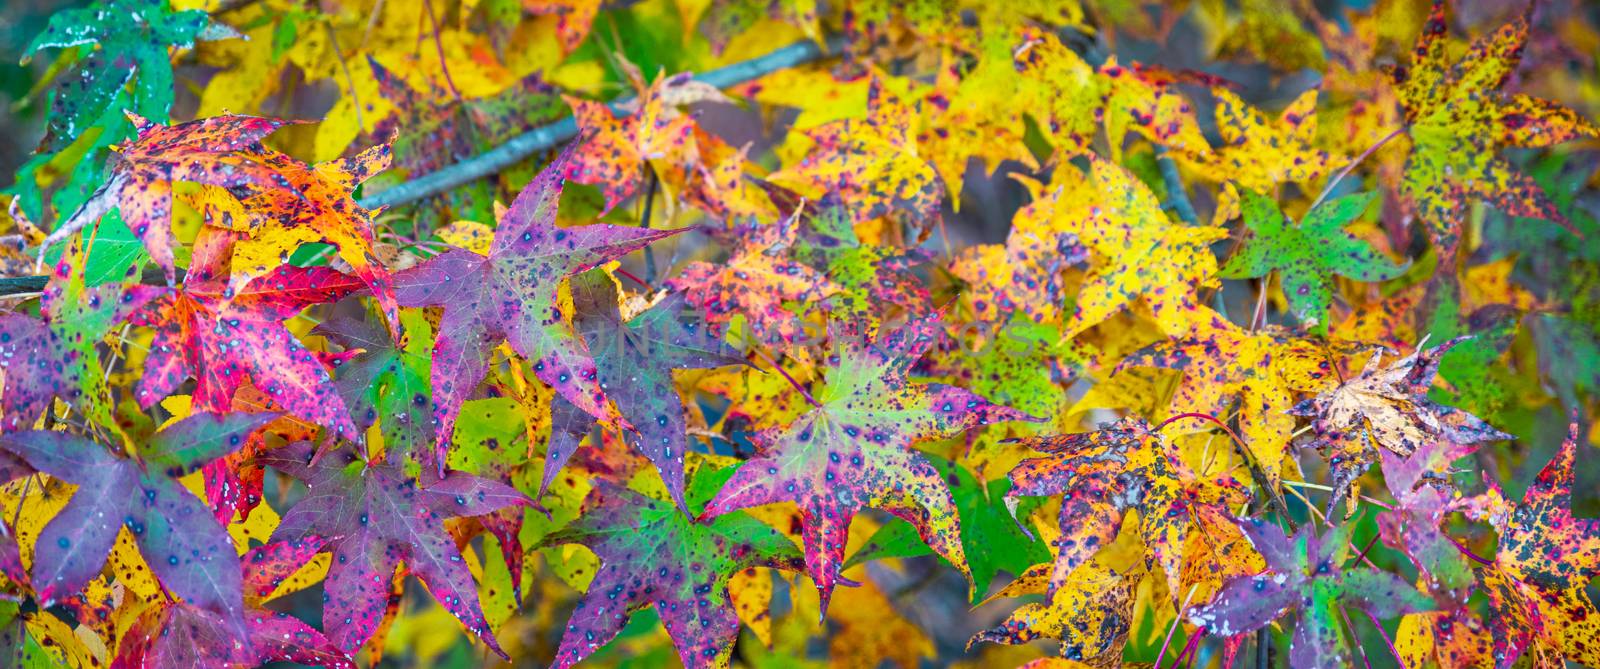 Panoramic texture of colorful fall foliage